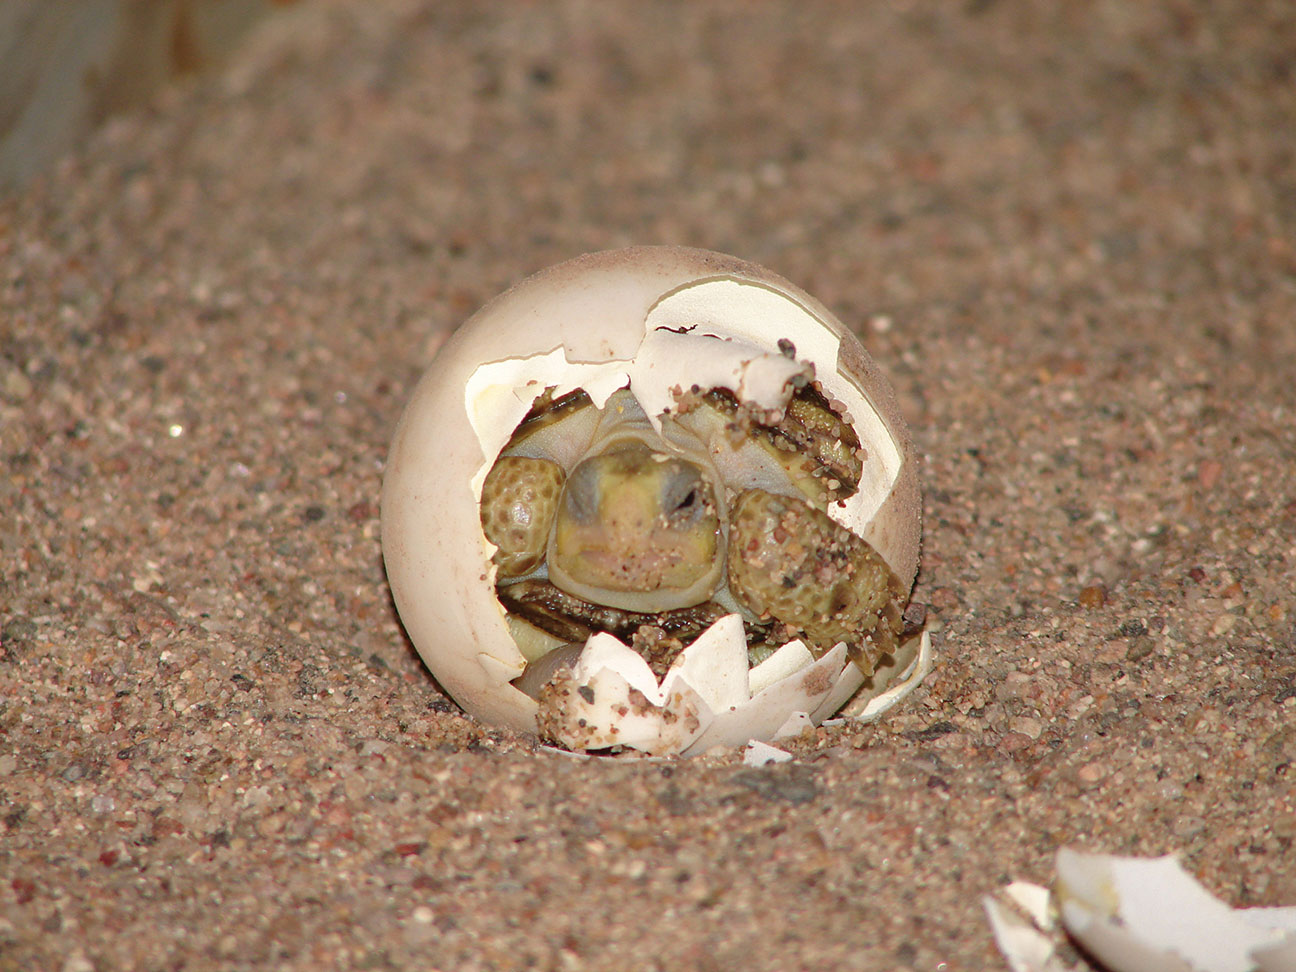 Photograph of a hatchling at Ladder Ranch by Steve Dobrott